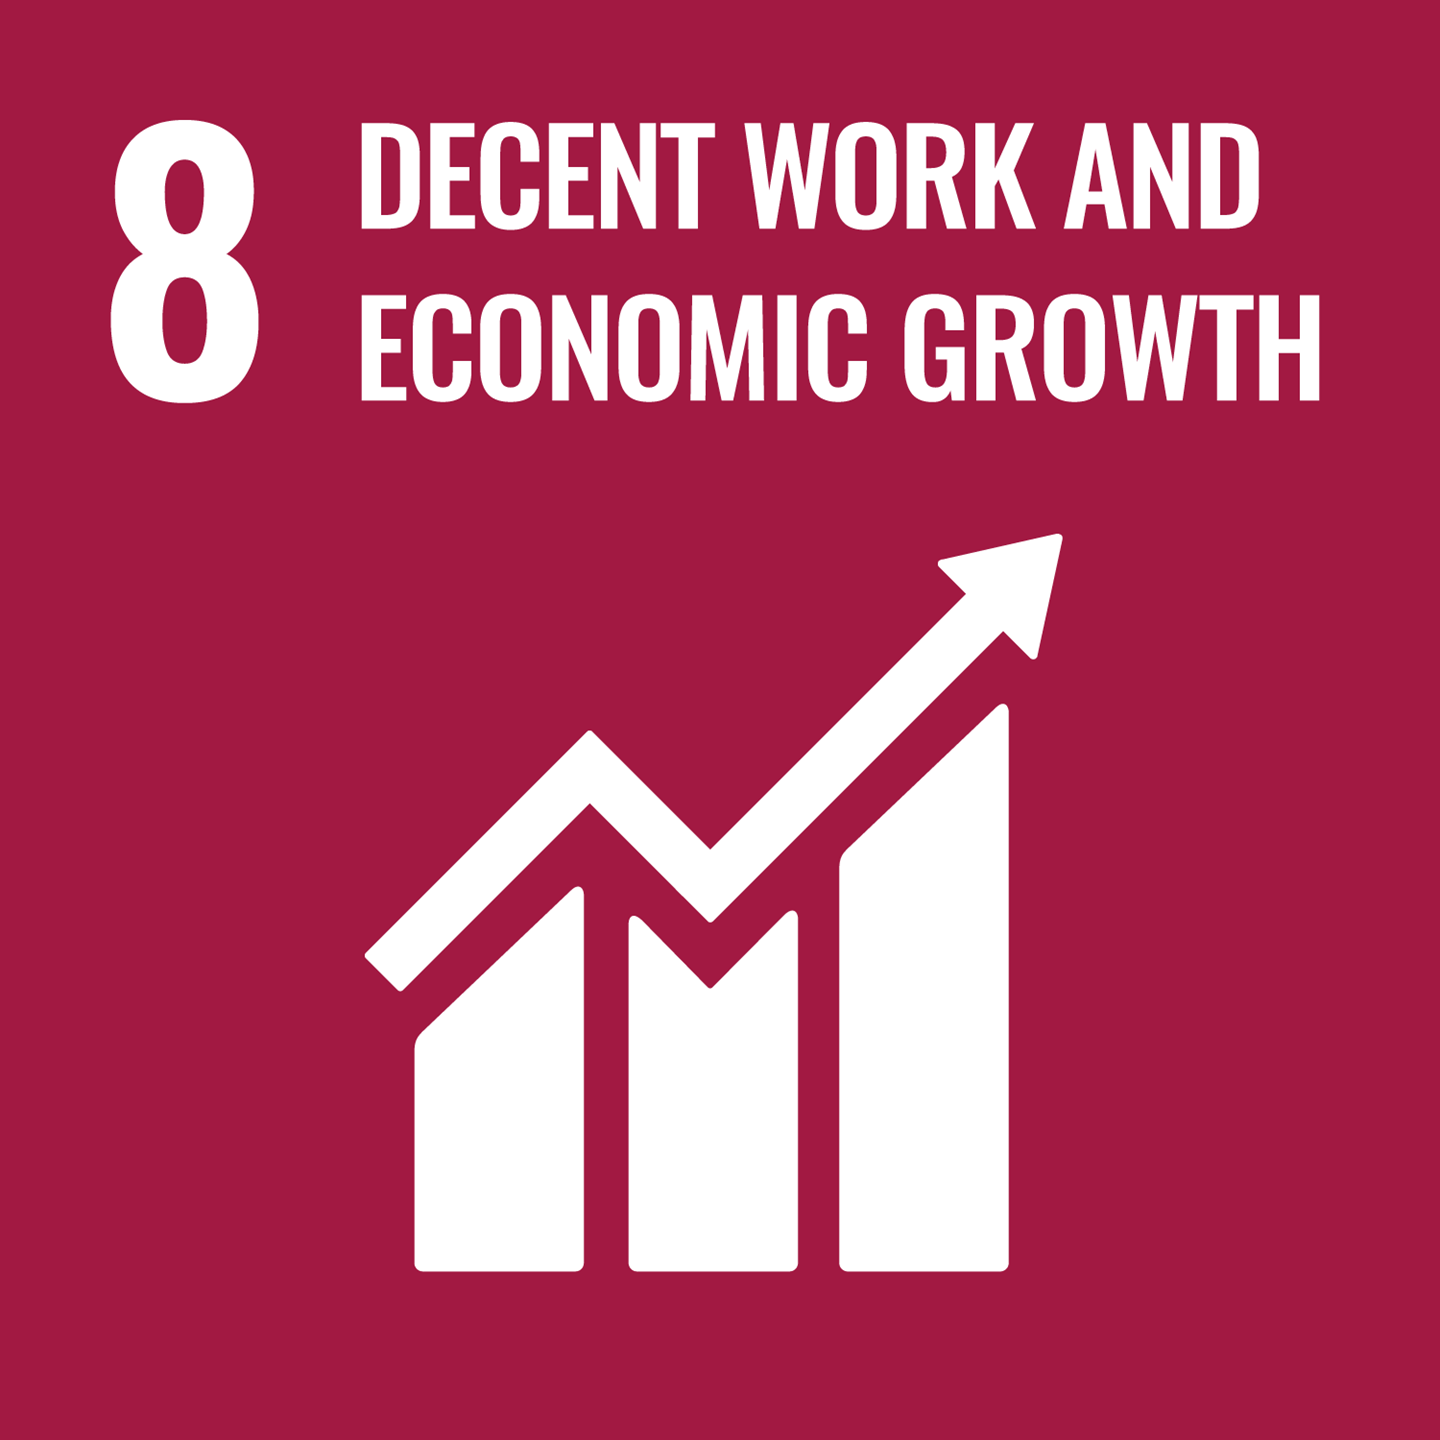 Sustainable Development Goal #8 - Decent Work and Economic Growth